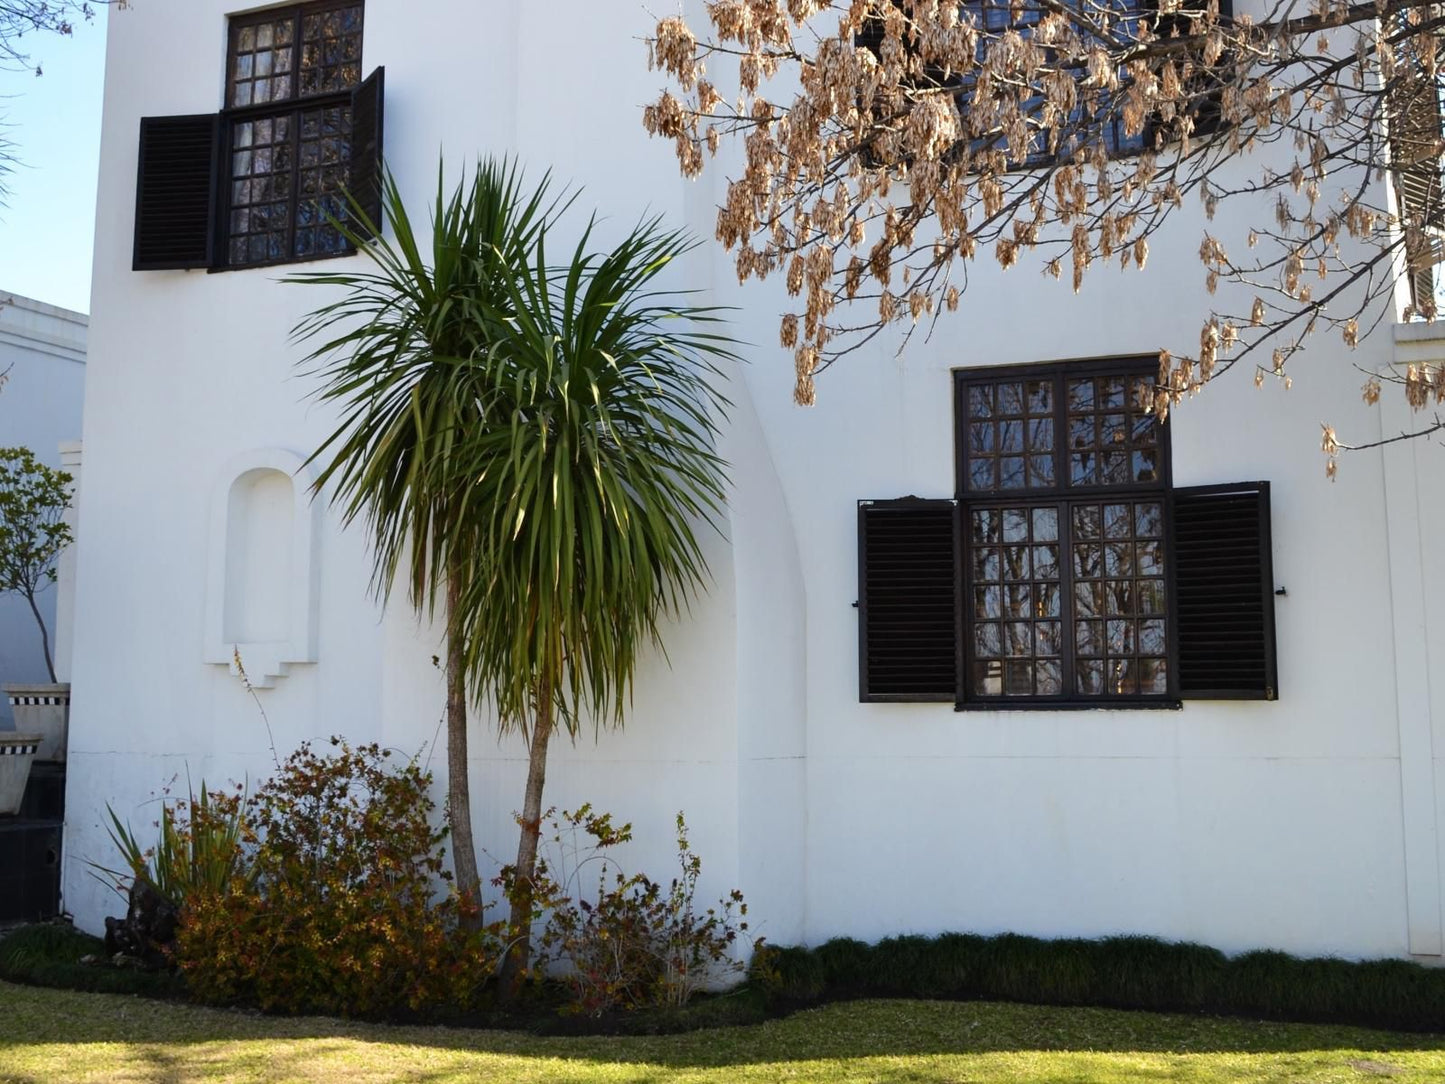 96 On Bree Guesthouse Heilbron Free State South Africa House, Building, Architecture, Palm Tree, Plant, Nature, Wood